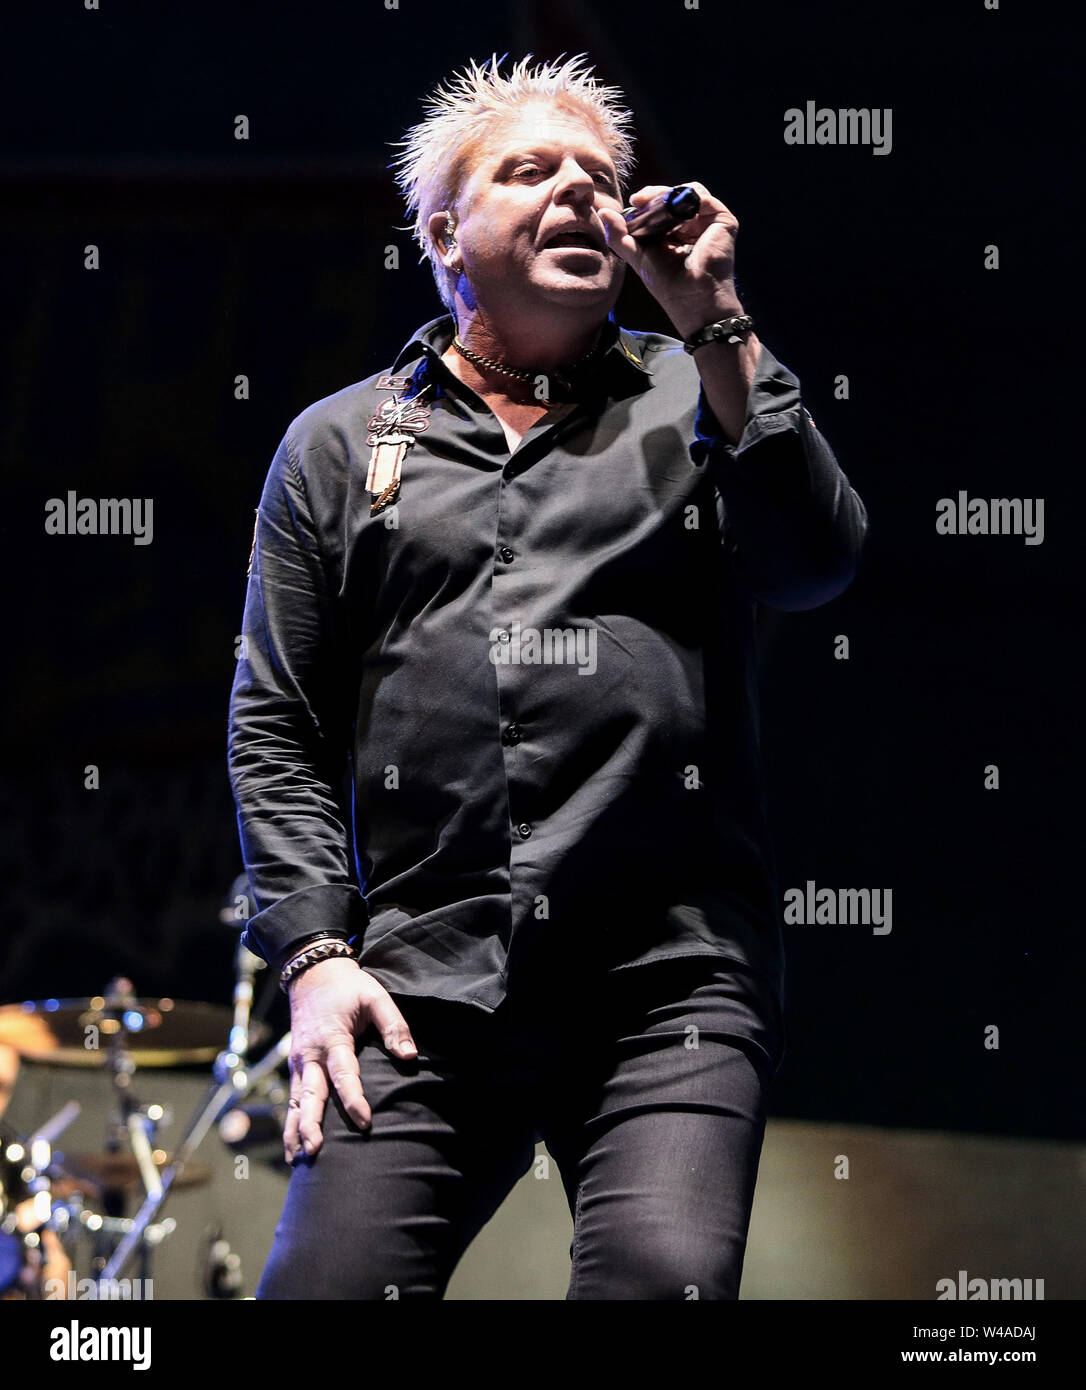 MOUNTAIN VIEW, CALIFORNIA - JULY 20: The Offspring lead singer Dexter  Holland performs during the Vans Warped Tour 25th Anniversary at Shoreline  Amphitheater on July 20, 2019 in Mountain View, California. Photo: